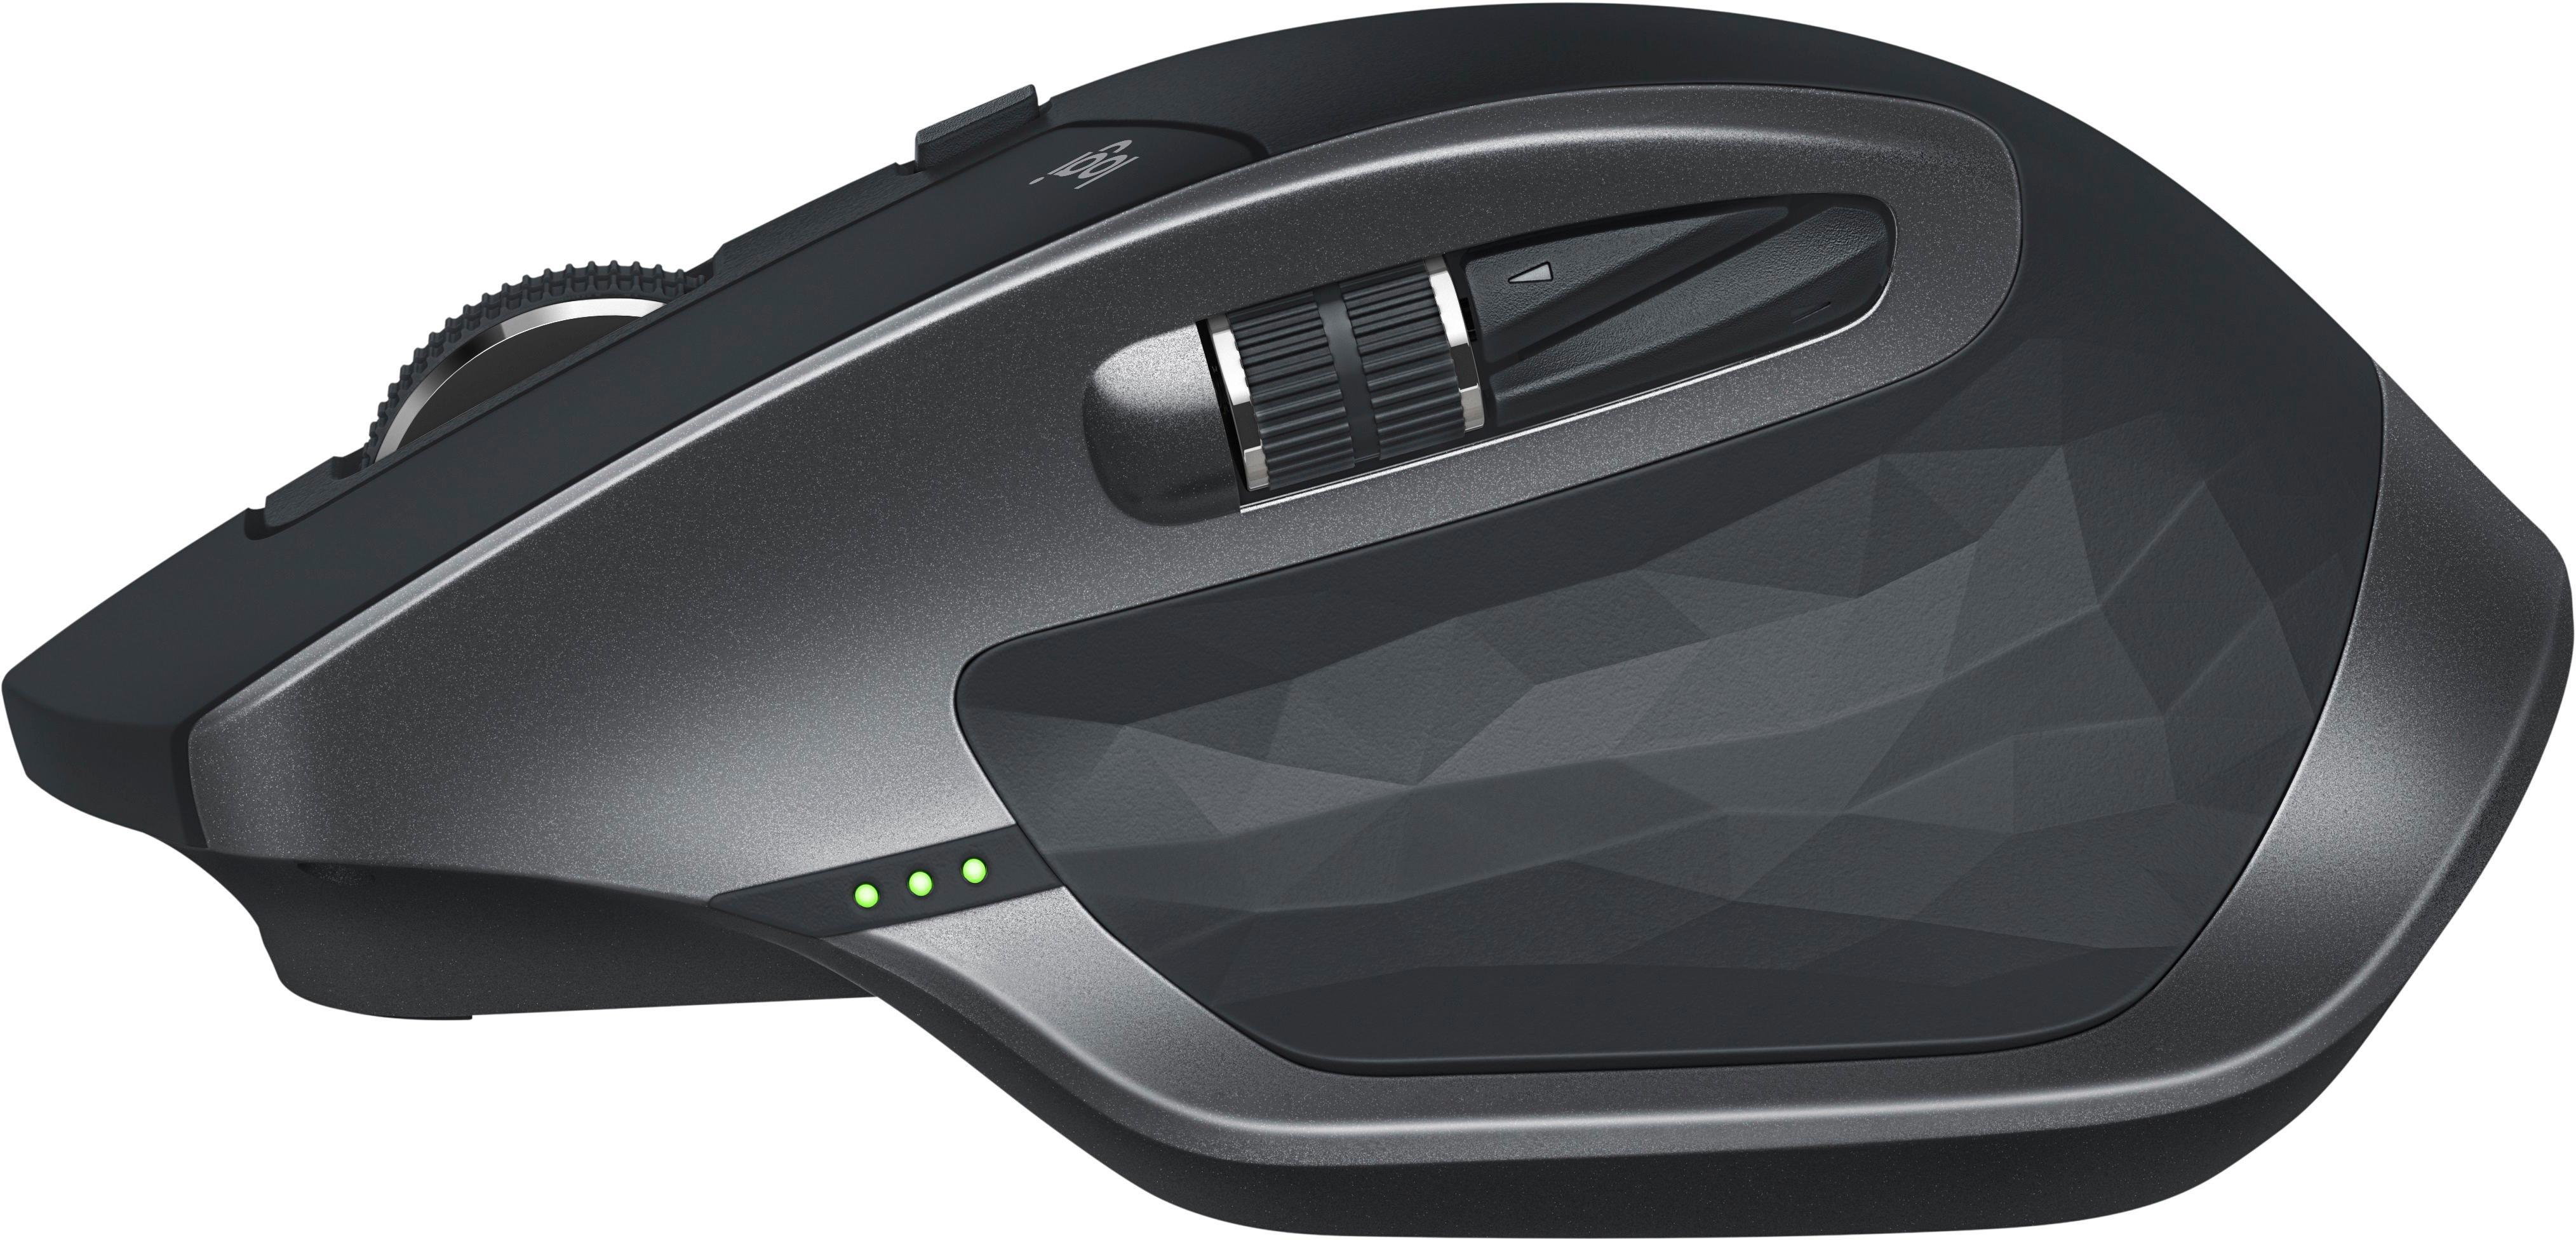 Buy: MX Master 2S Wireless Laser Mouse Graphite